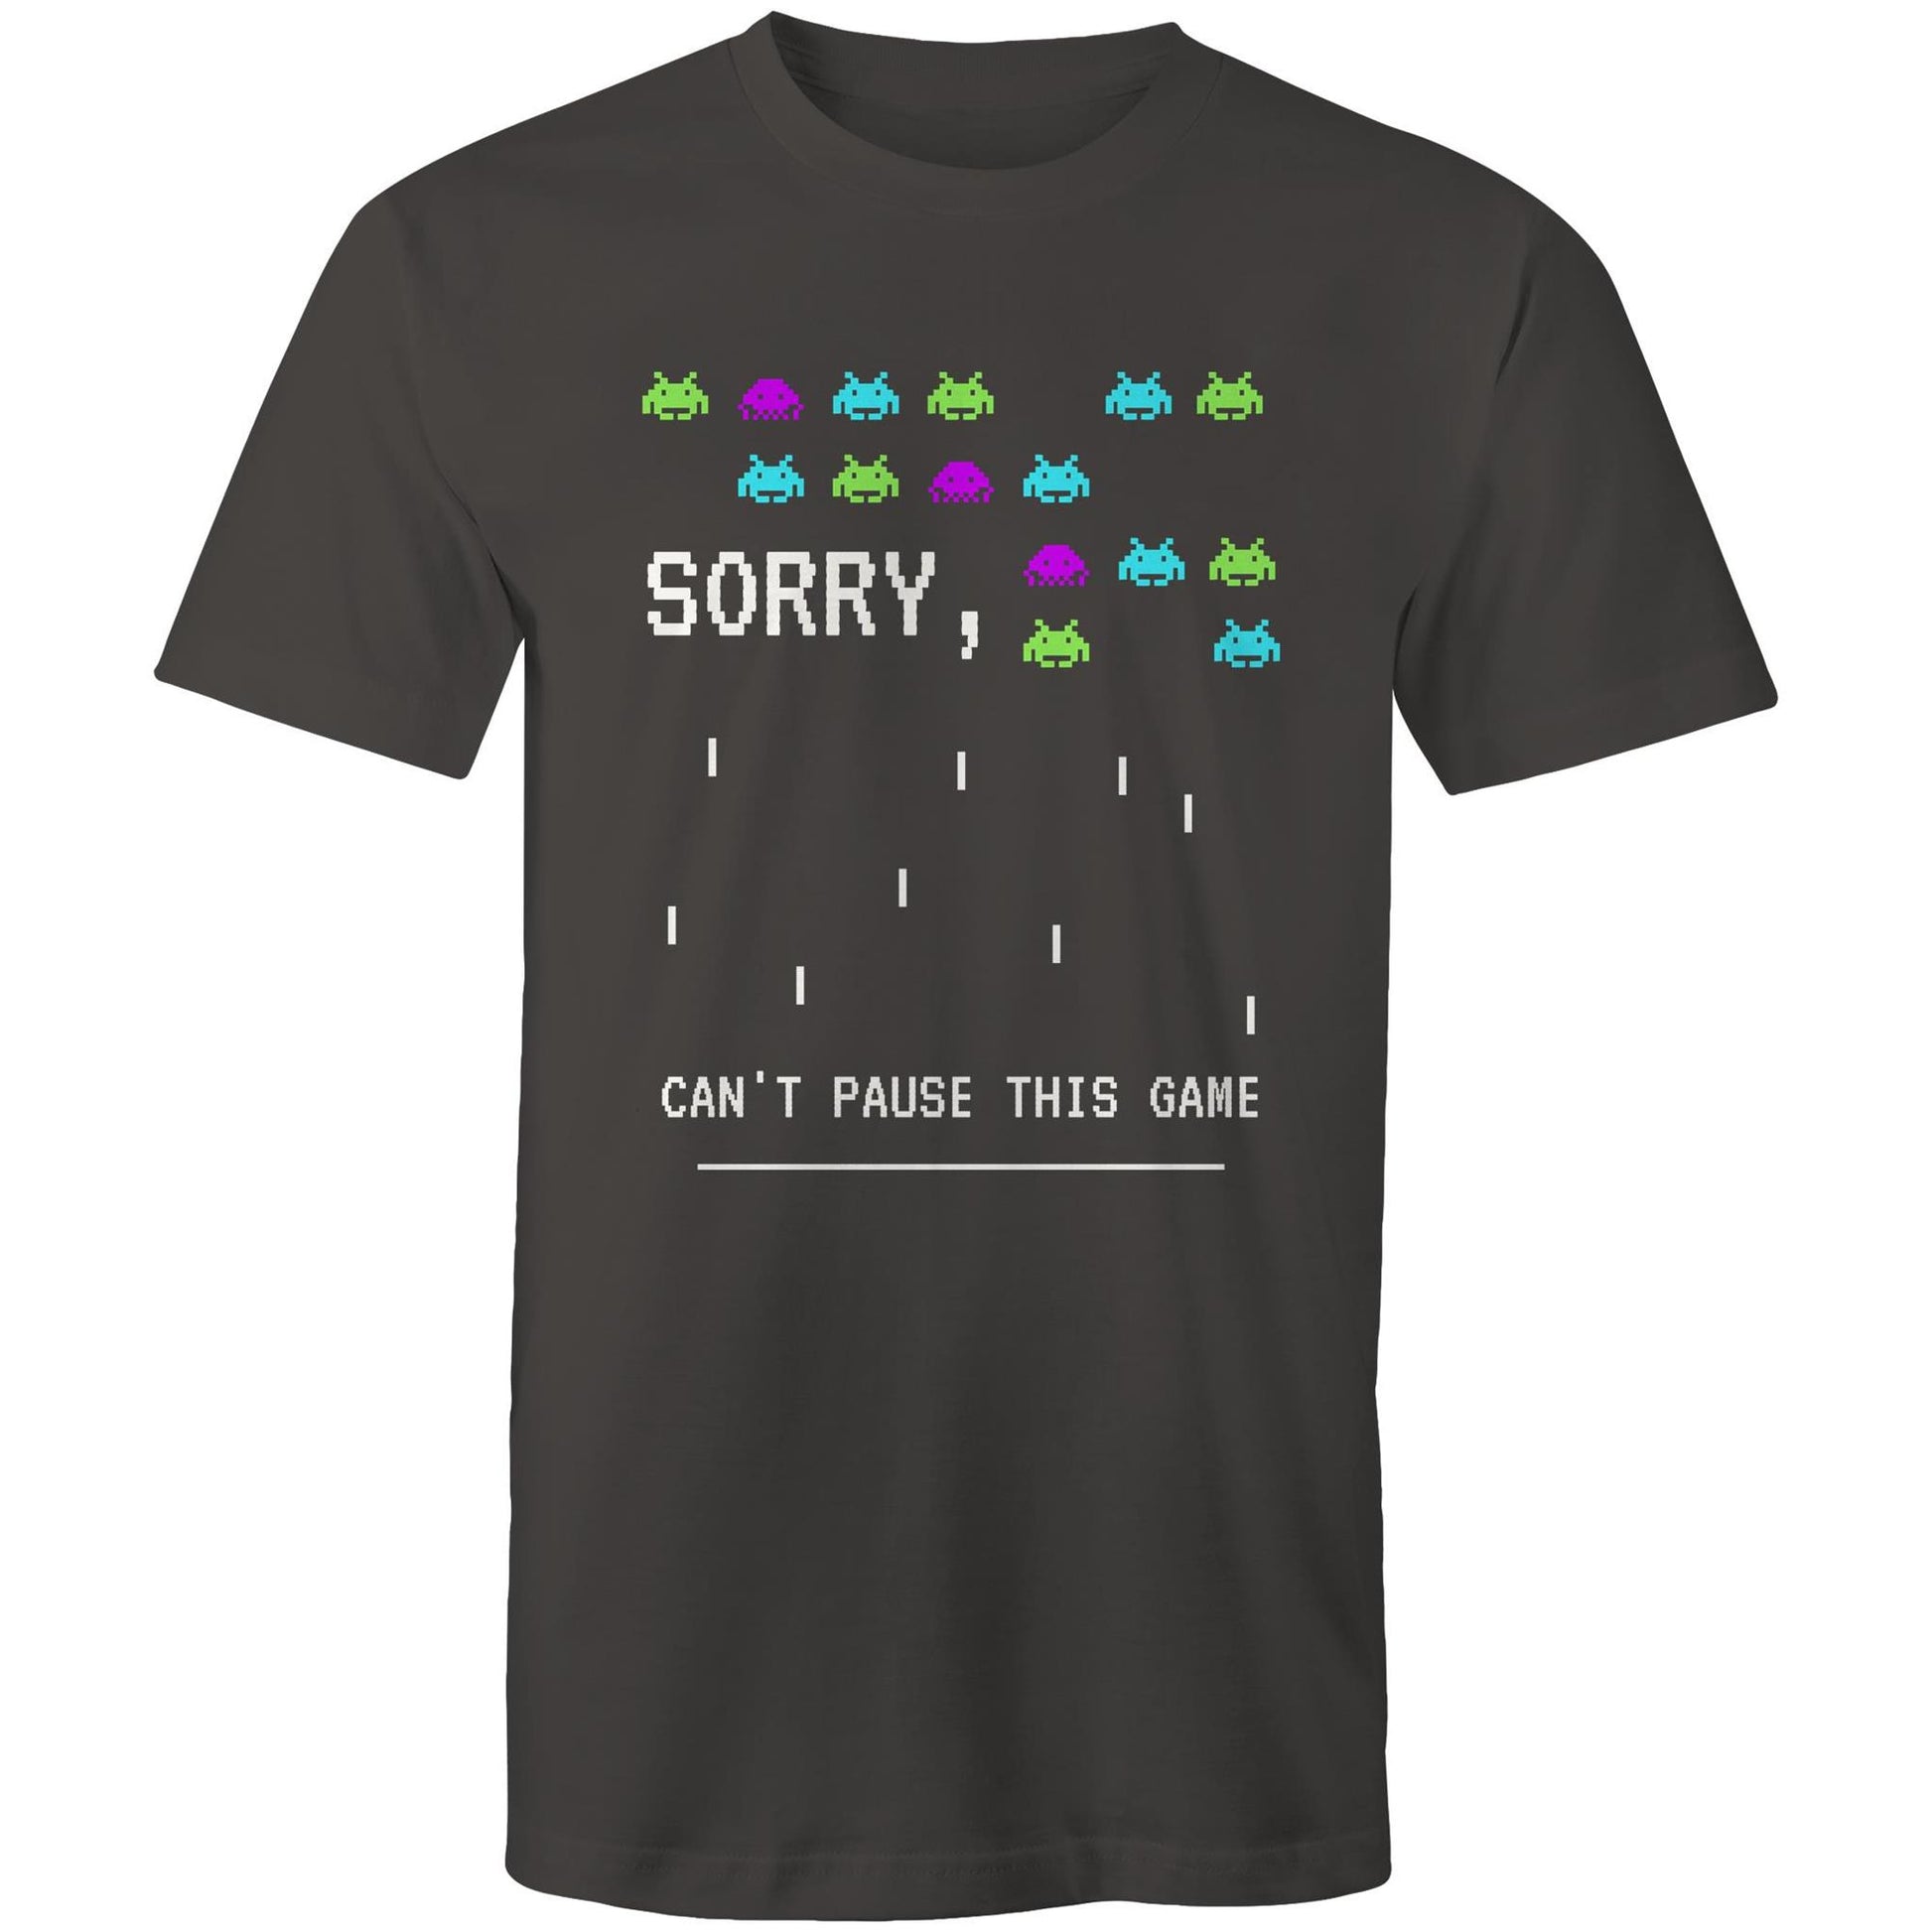 Sorry, Can't Pause This Game - Mens T-Shirt Charcoal Mens T-shirt Games